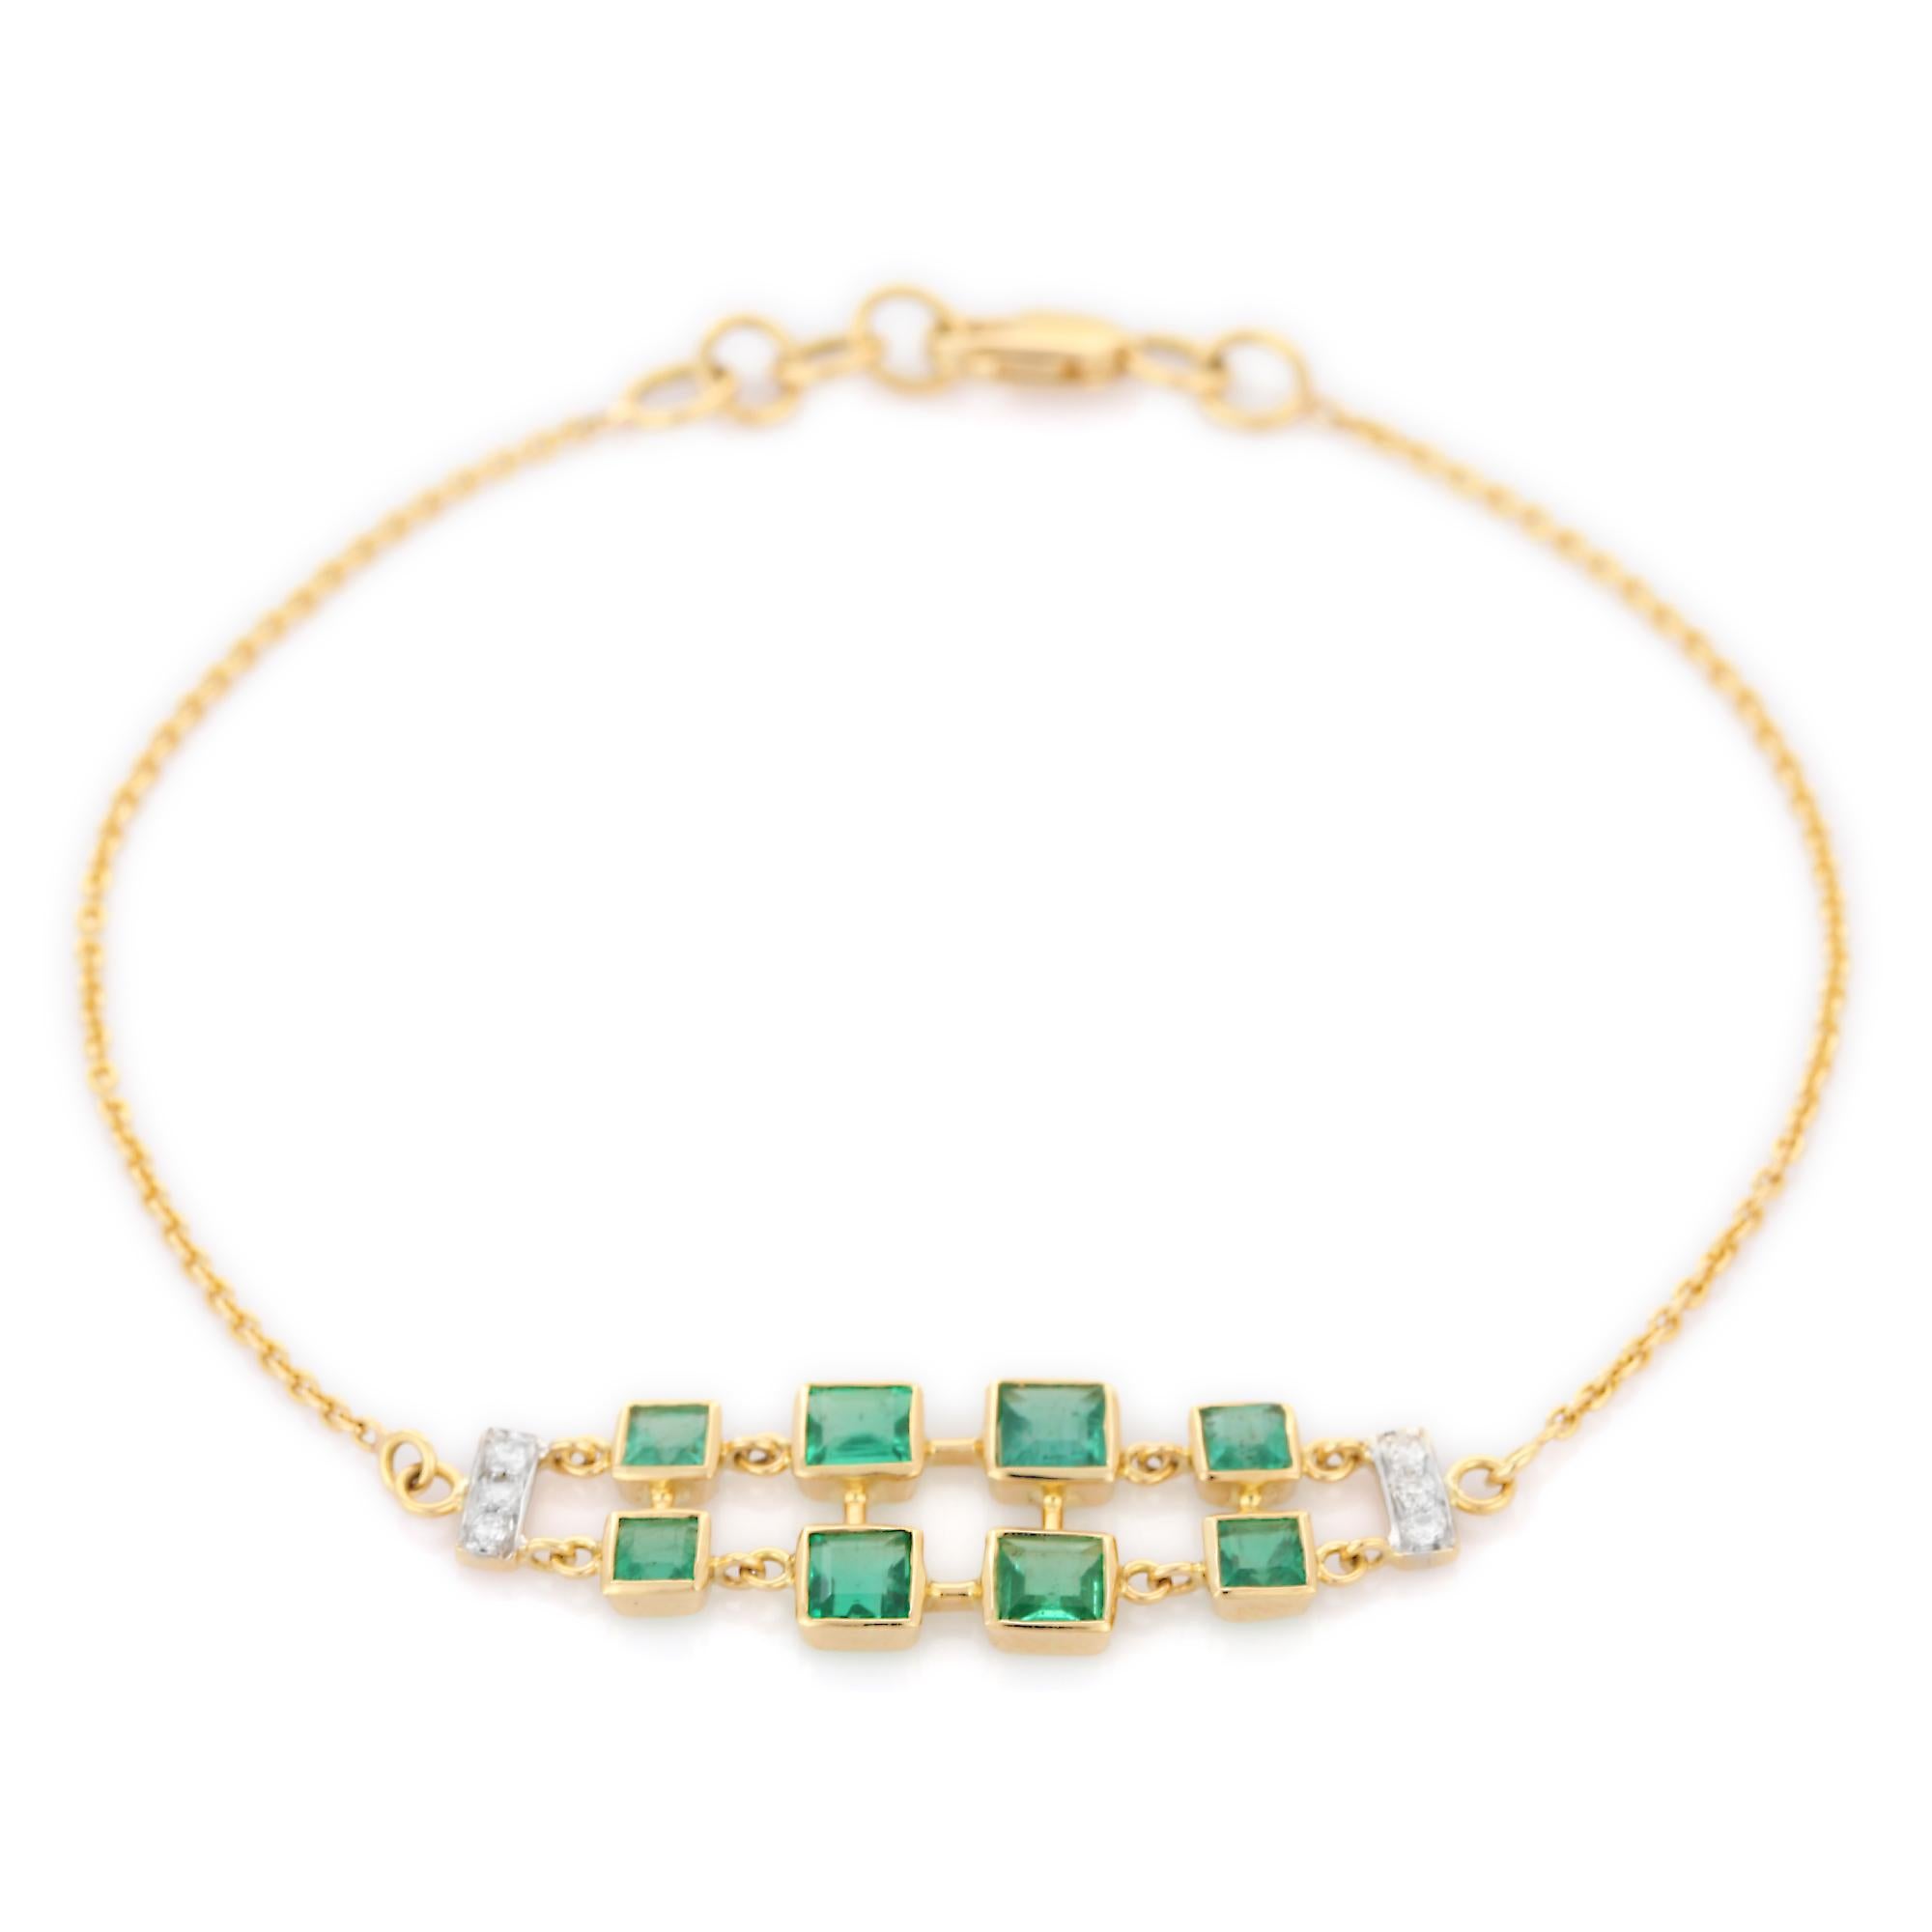 Women's Distinctive Square Cut Emerald and Diamond Bracelet Studded in 18K Yellow Gold For Sale